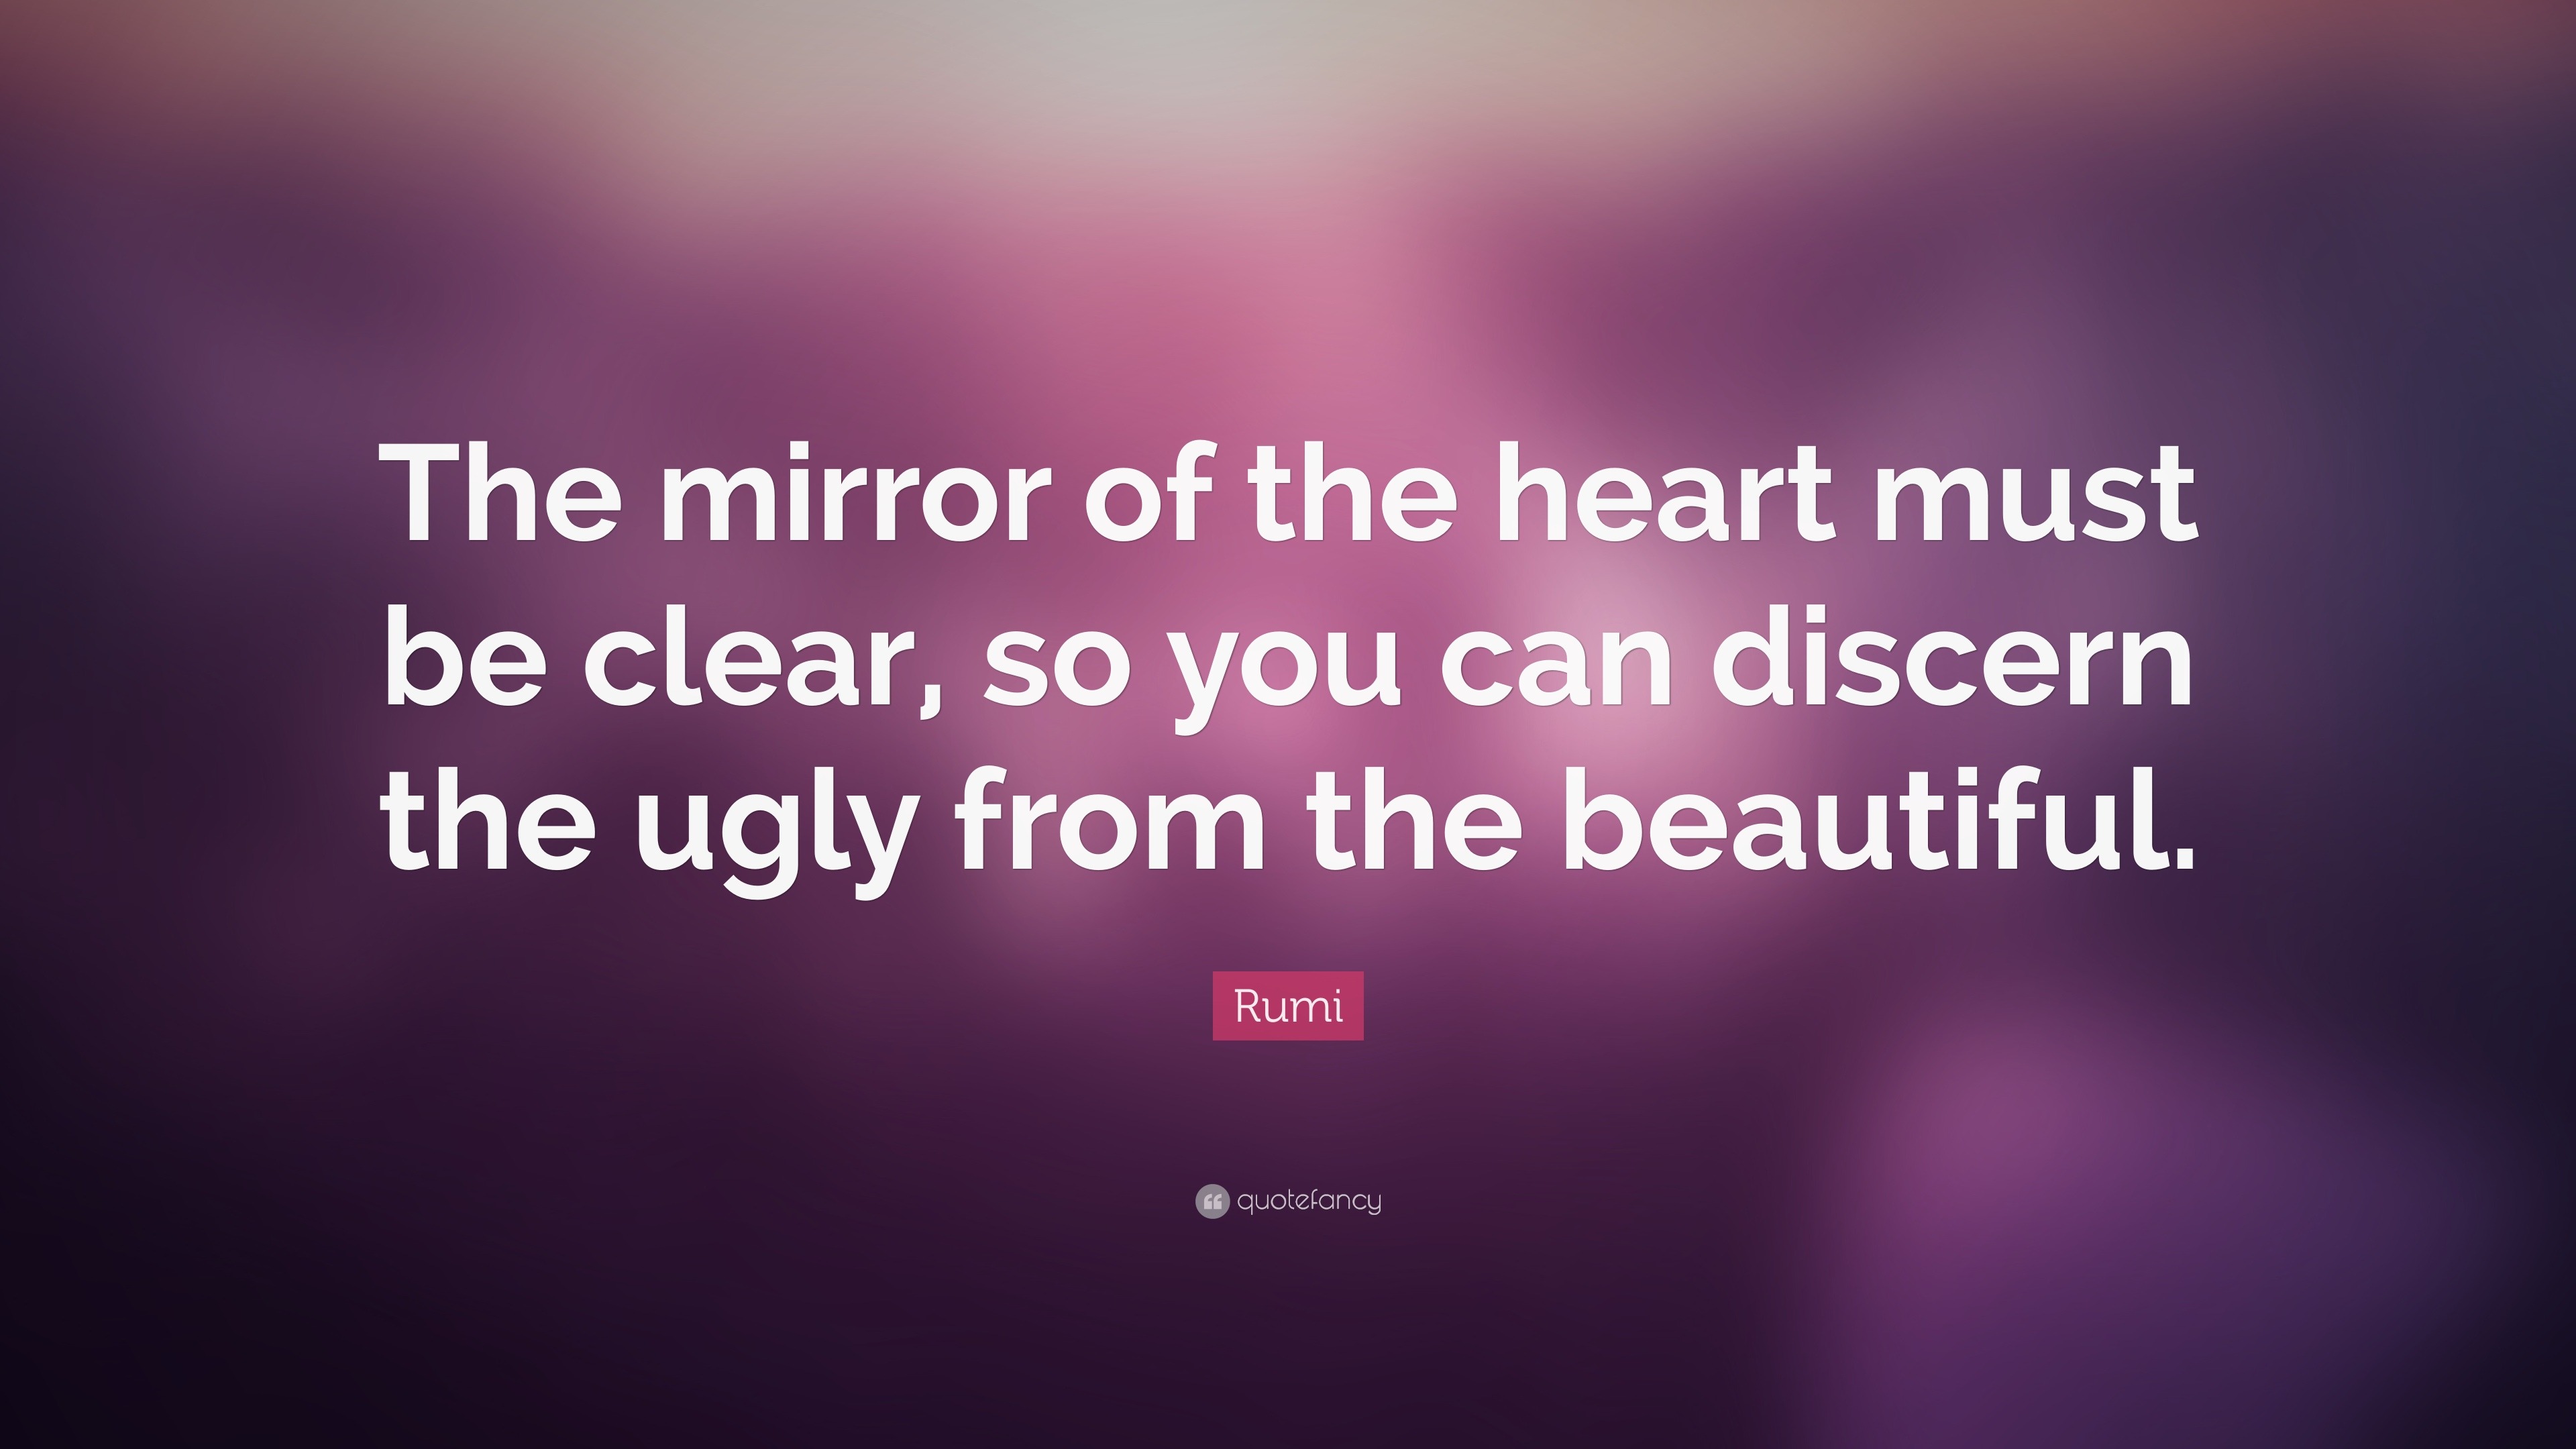 Rumi Quote: “The mirror of the heart must be clear, so you can discern ...